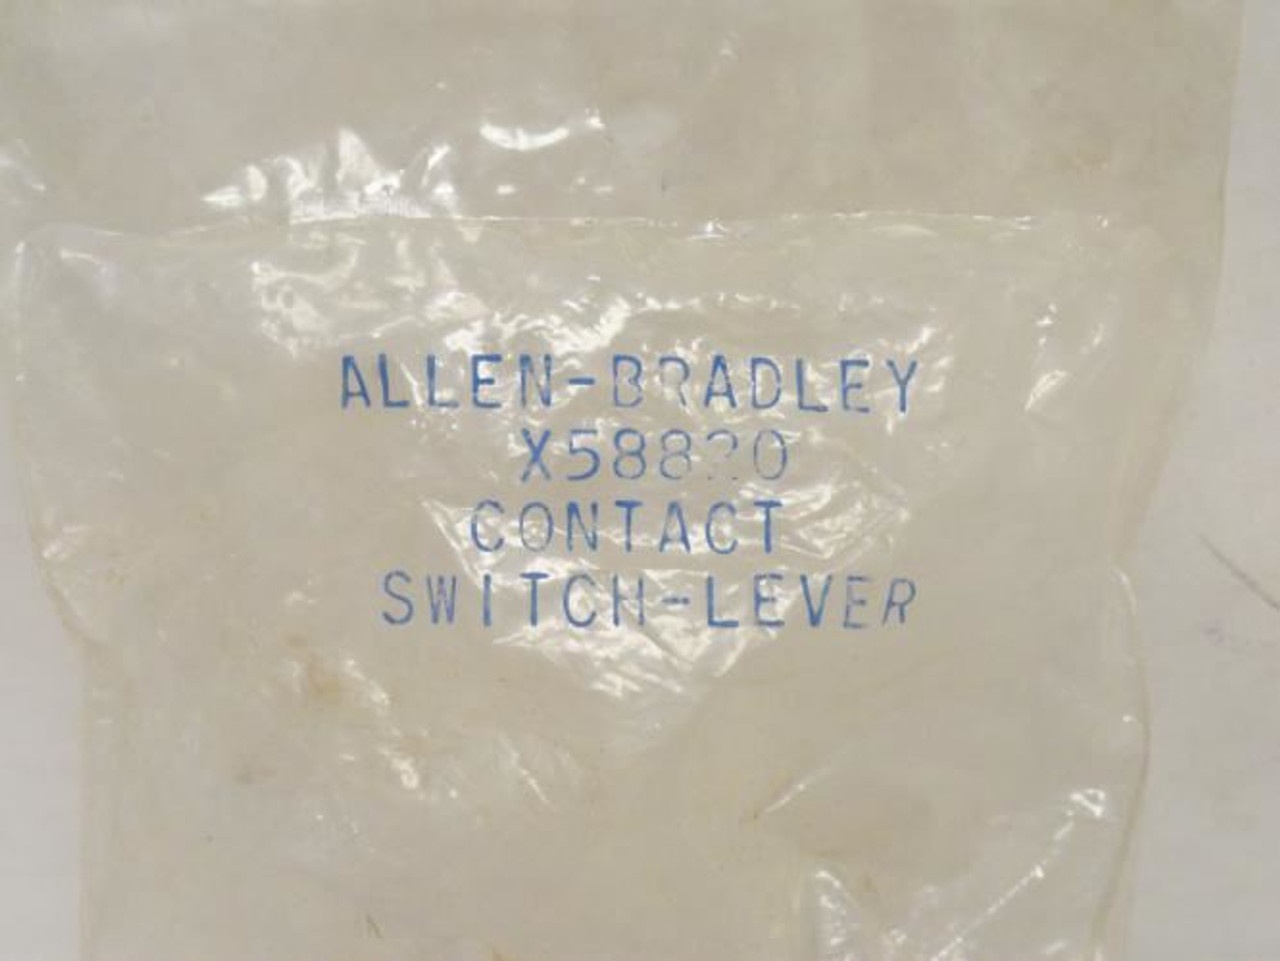 Allen-Bradley X-58820; Contact Switch Level Assembly